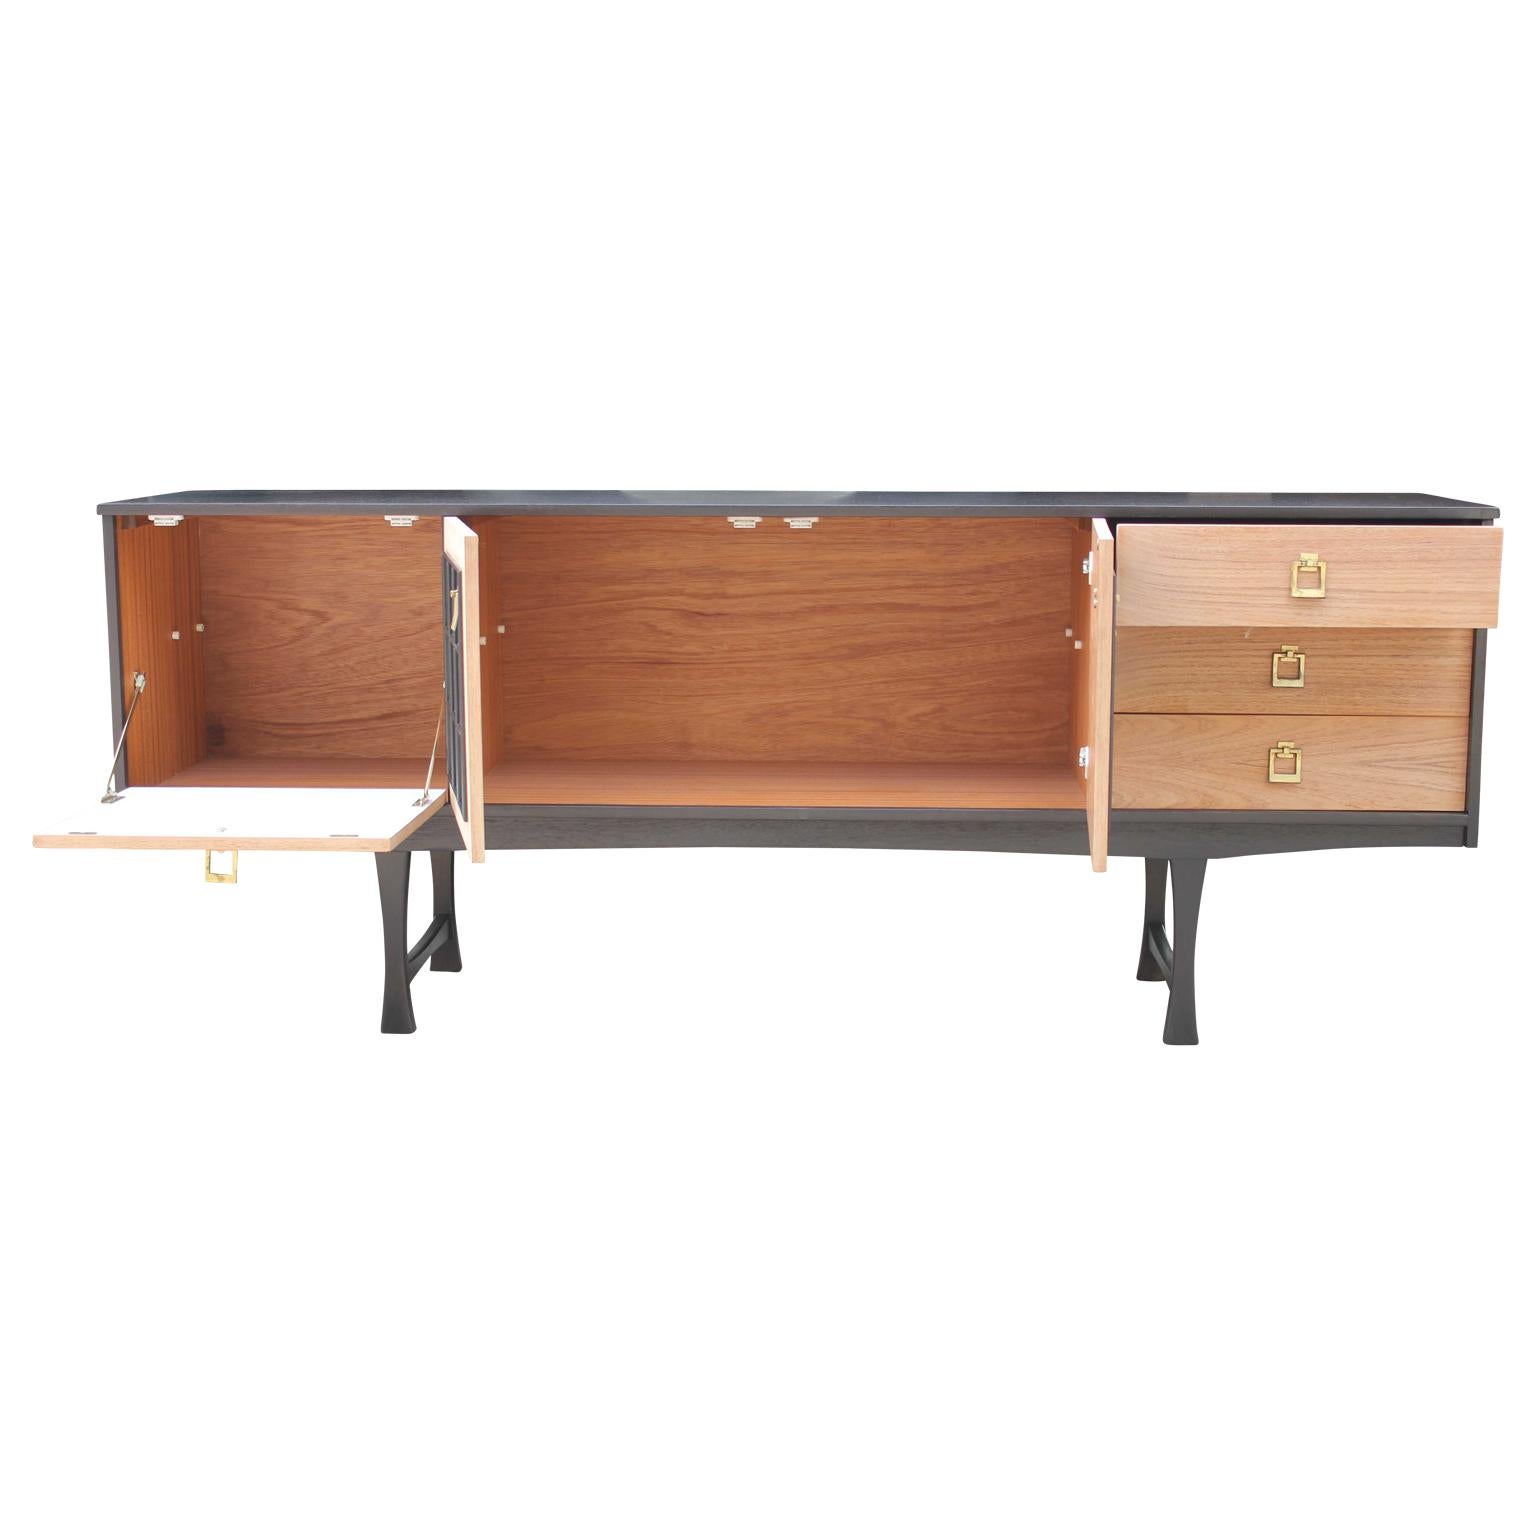 Mid-Century Modern Modern Baker Style Two-Tone Credenza or Sideboard with Brass Hardware